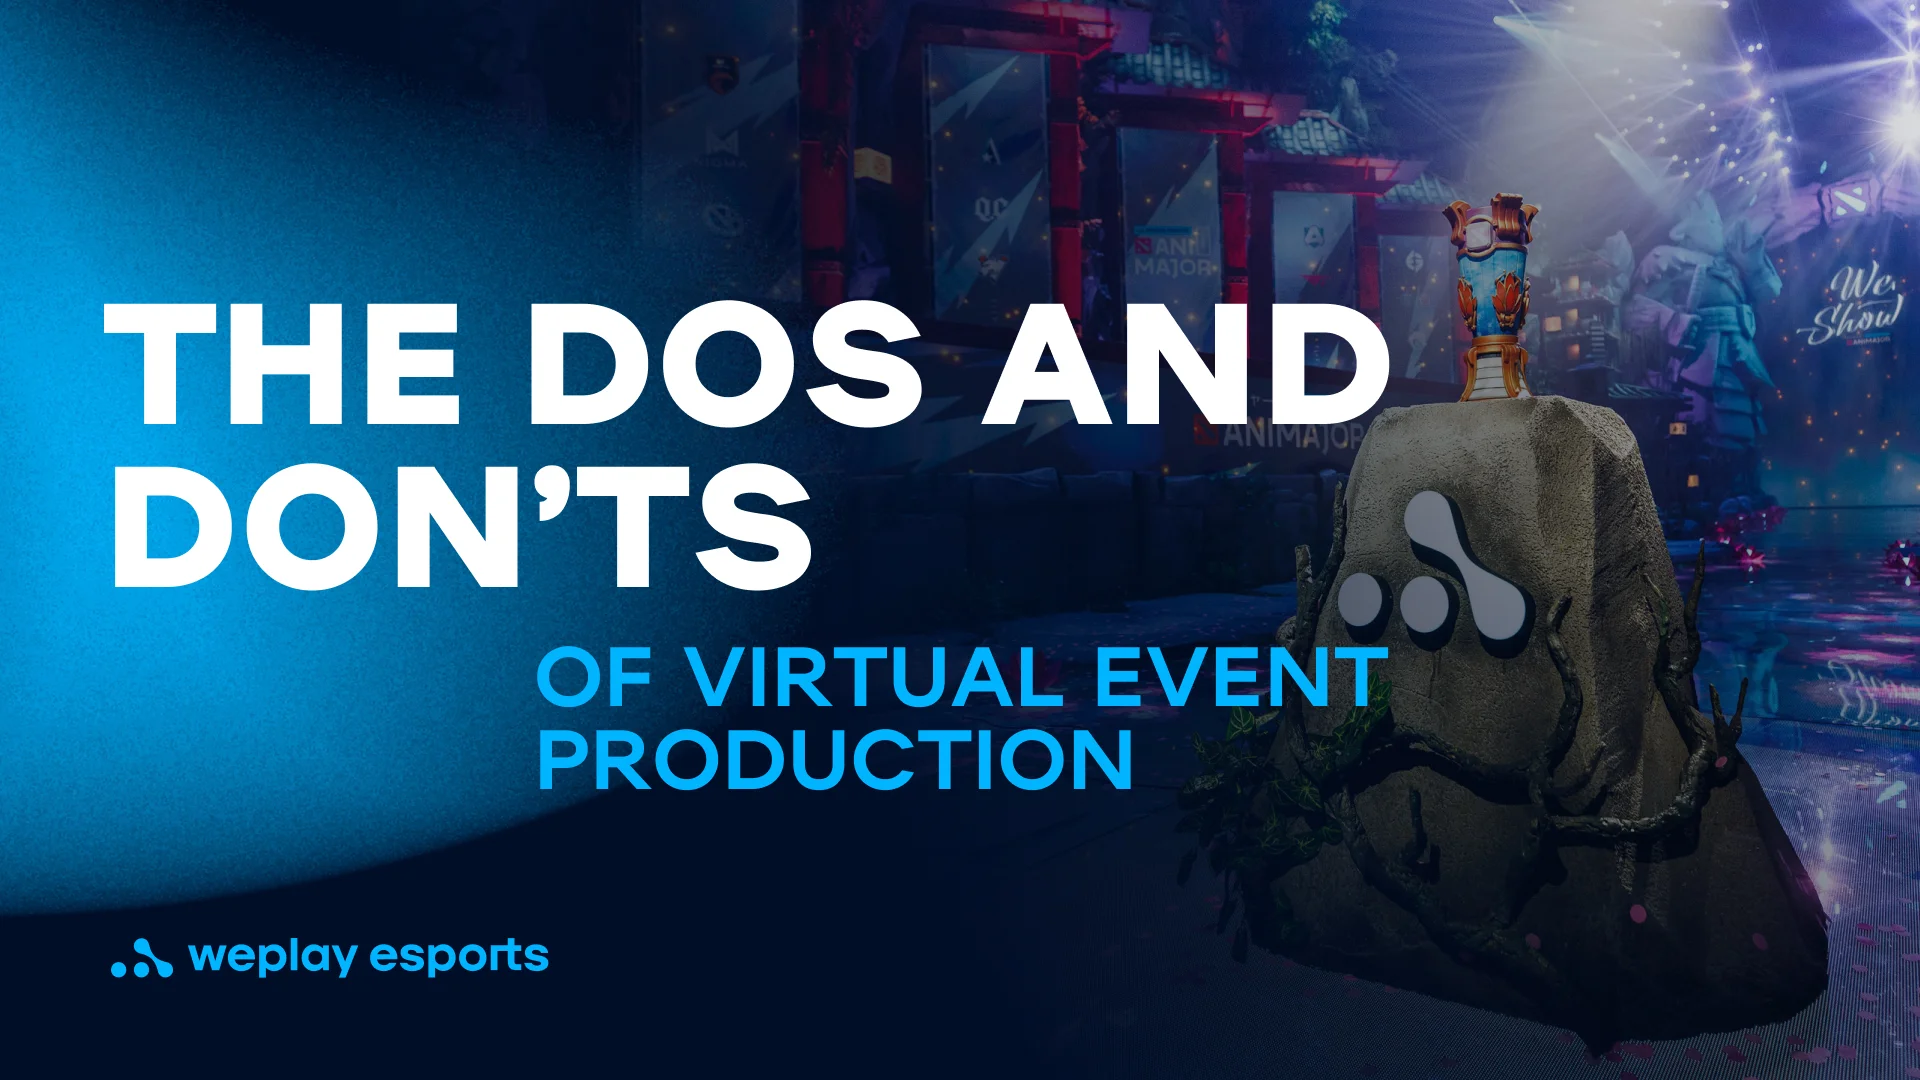 The Dos and Don’ts of virtual event production